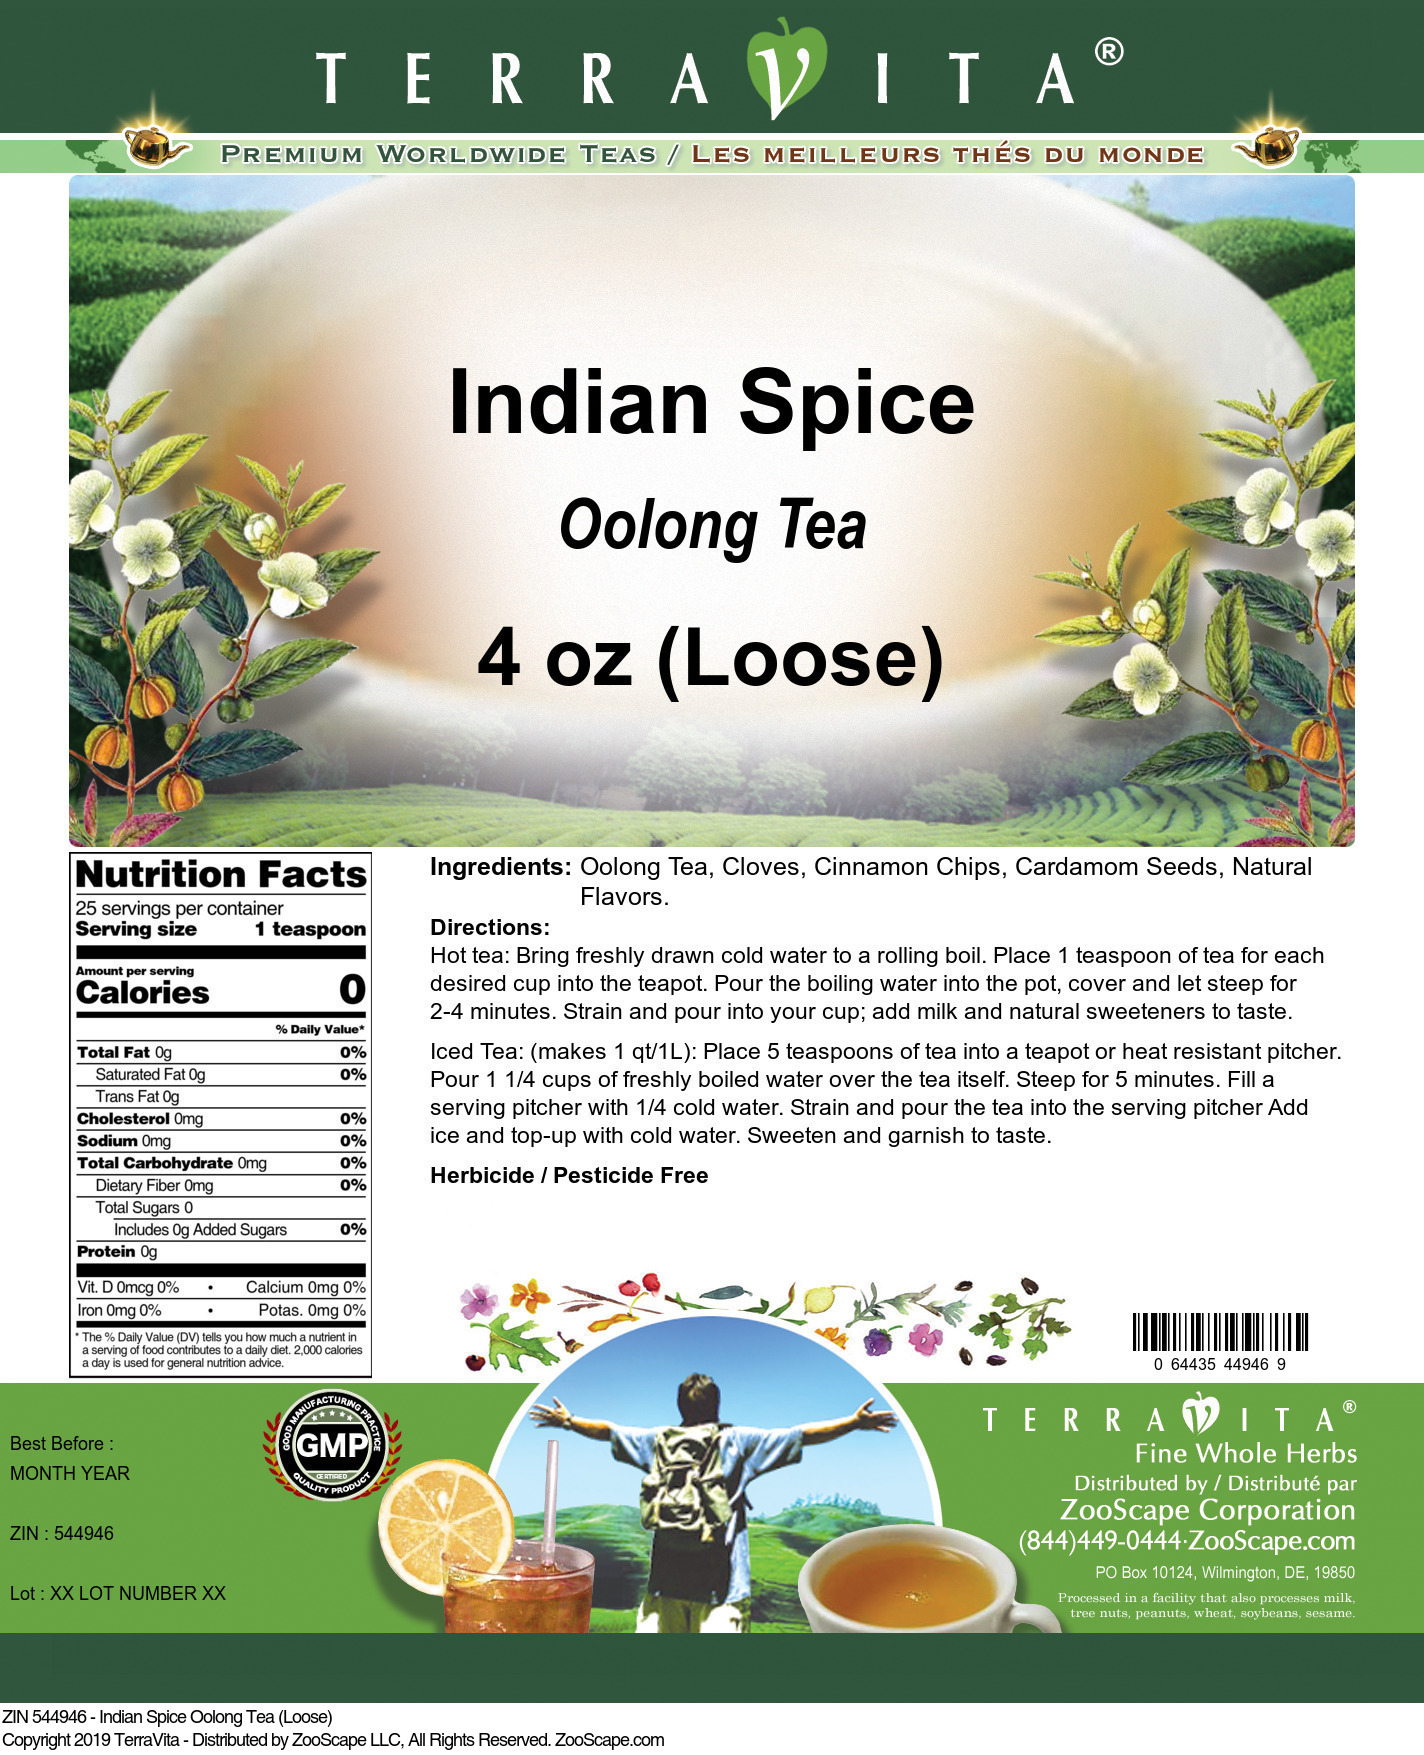 Indian Spice Oolong Tea (Loose) - Label